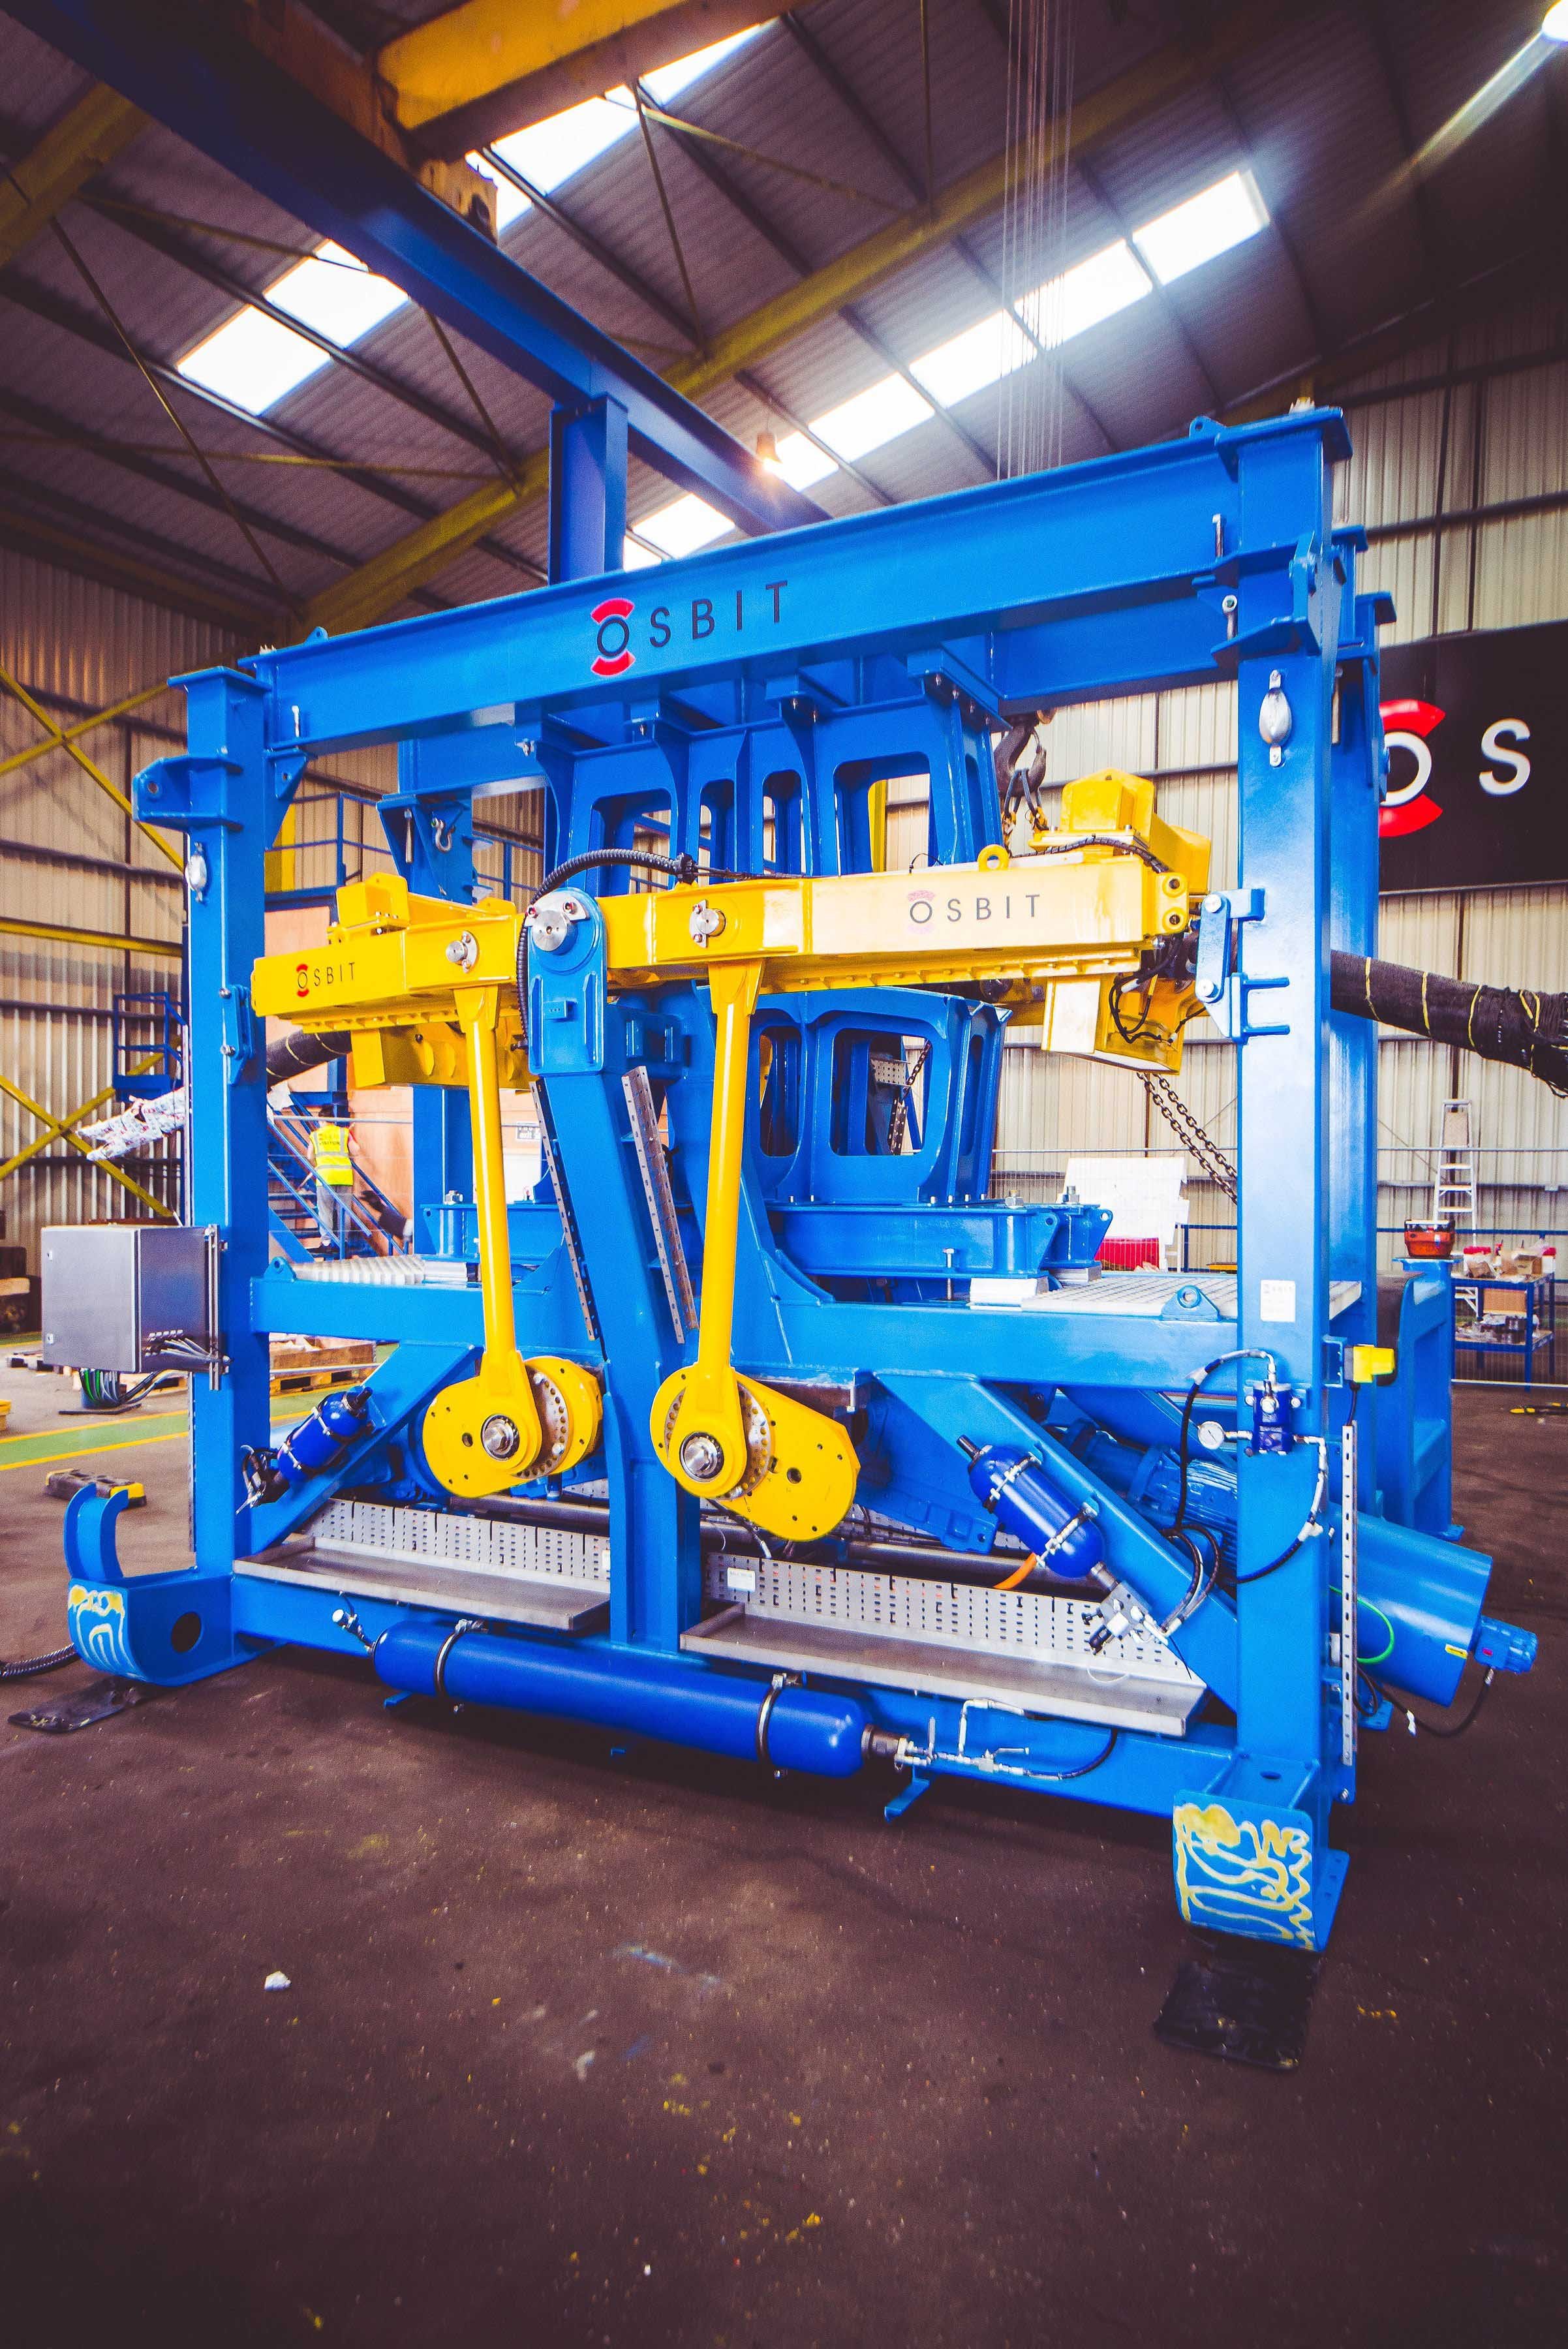 Osbit cable test rig for ORE Catapult in Port of Blyth assembly facility